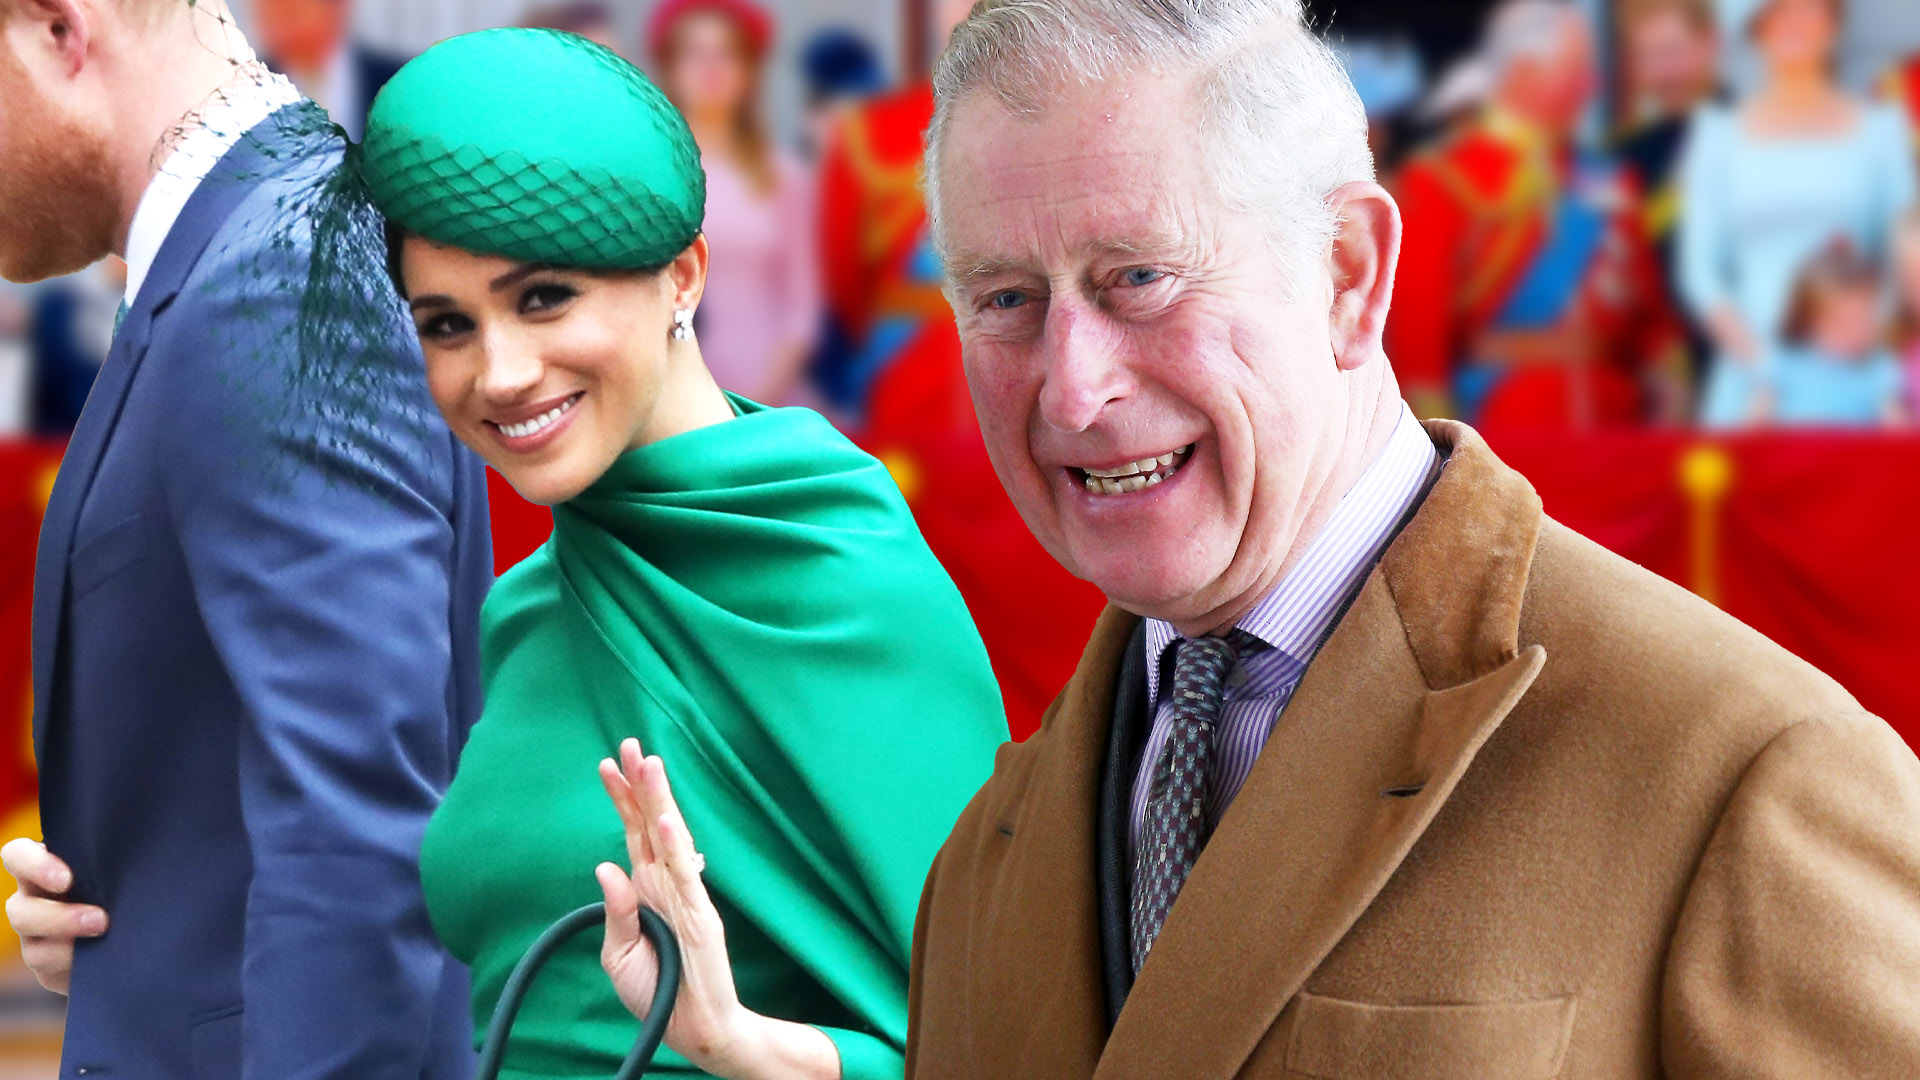 Meghan Markle's Friend Reveals the Real Reason She's Skipping the Coronation